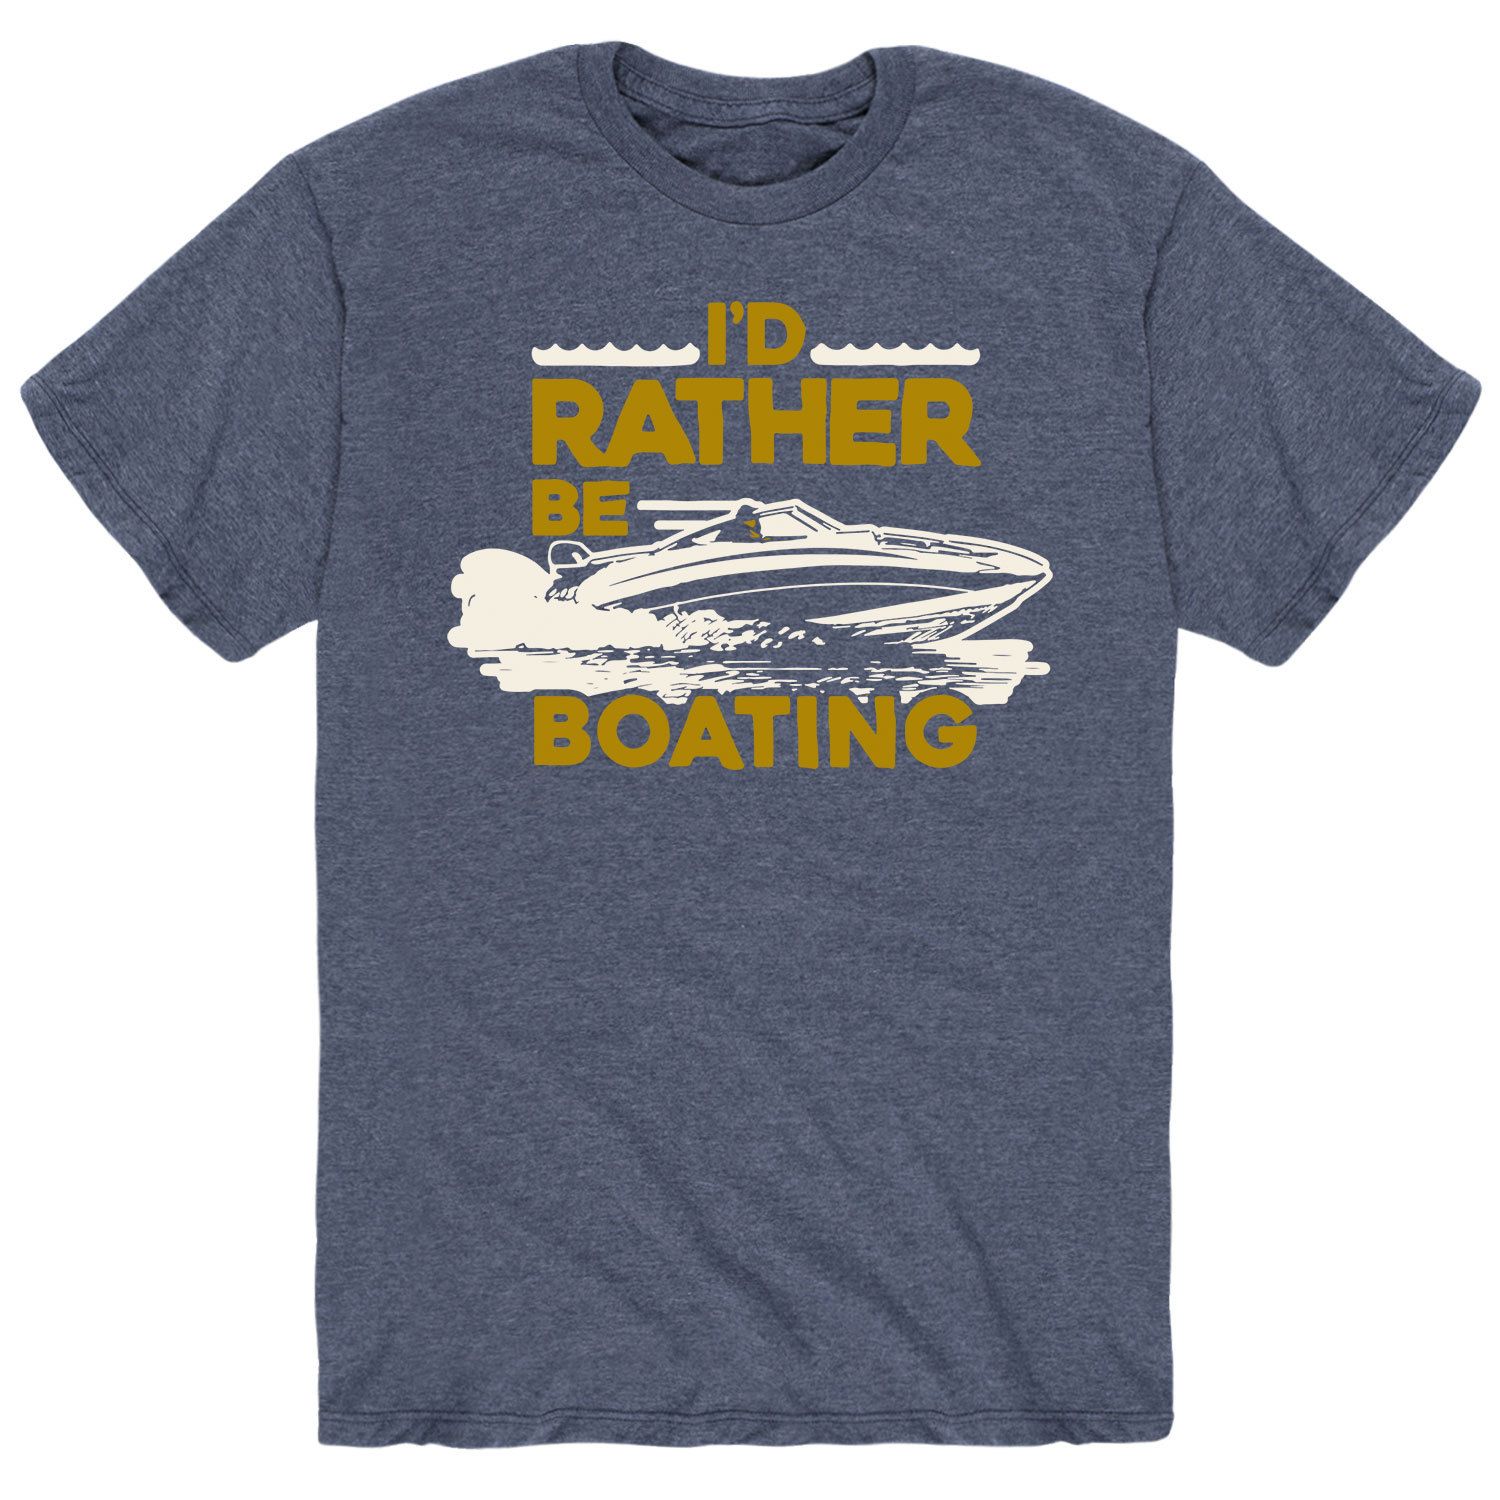 Мужская футболка «Rather Be Boating» Licensed Character i d rather be sailing boating shirt funny sailboat gift hoodies for male unique sweatshirts 2021 popular clothes long sleeve